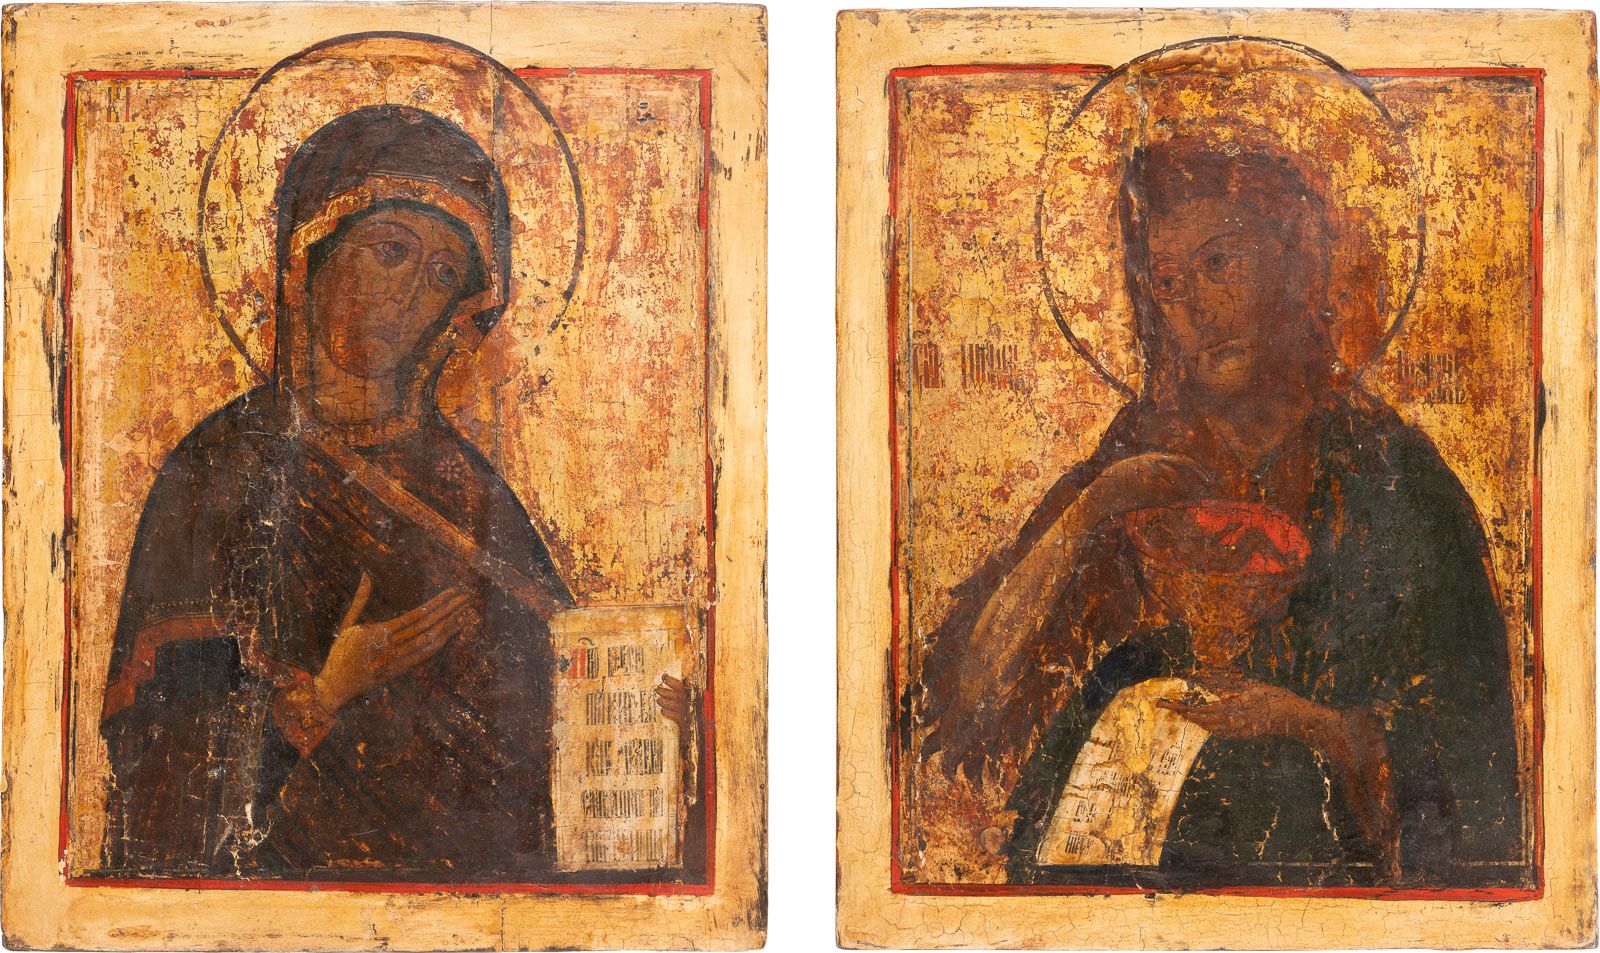 TWO LARGE ICONS SHOWING THE MOTHER OF GOD AND ST. JOHN THE 两幅大型圣像，分别展示了圣母和圣约翰。俄罗&hellip;